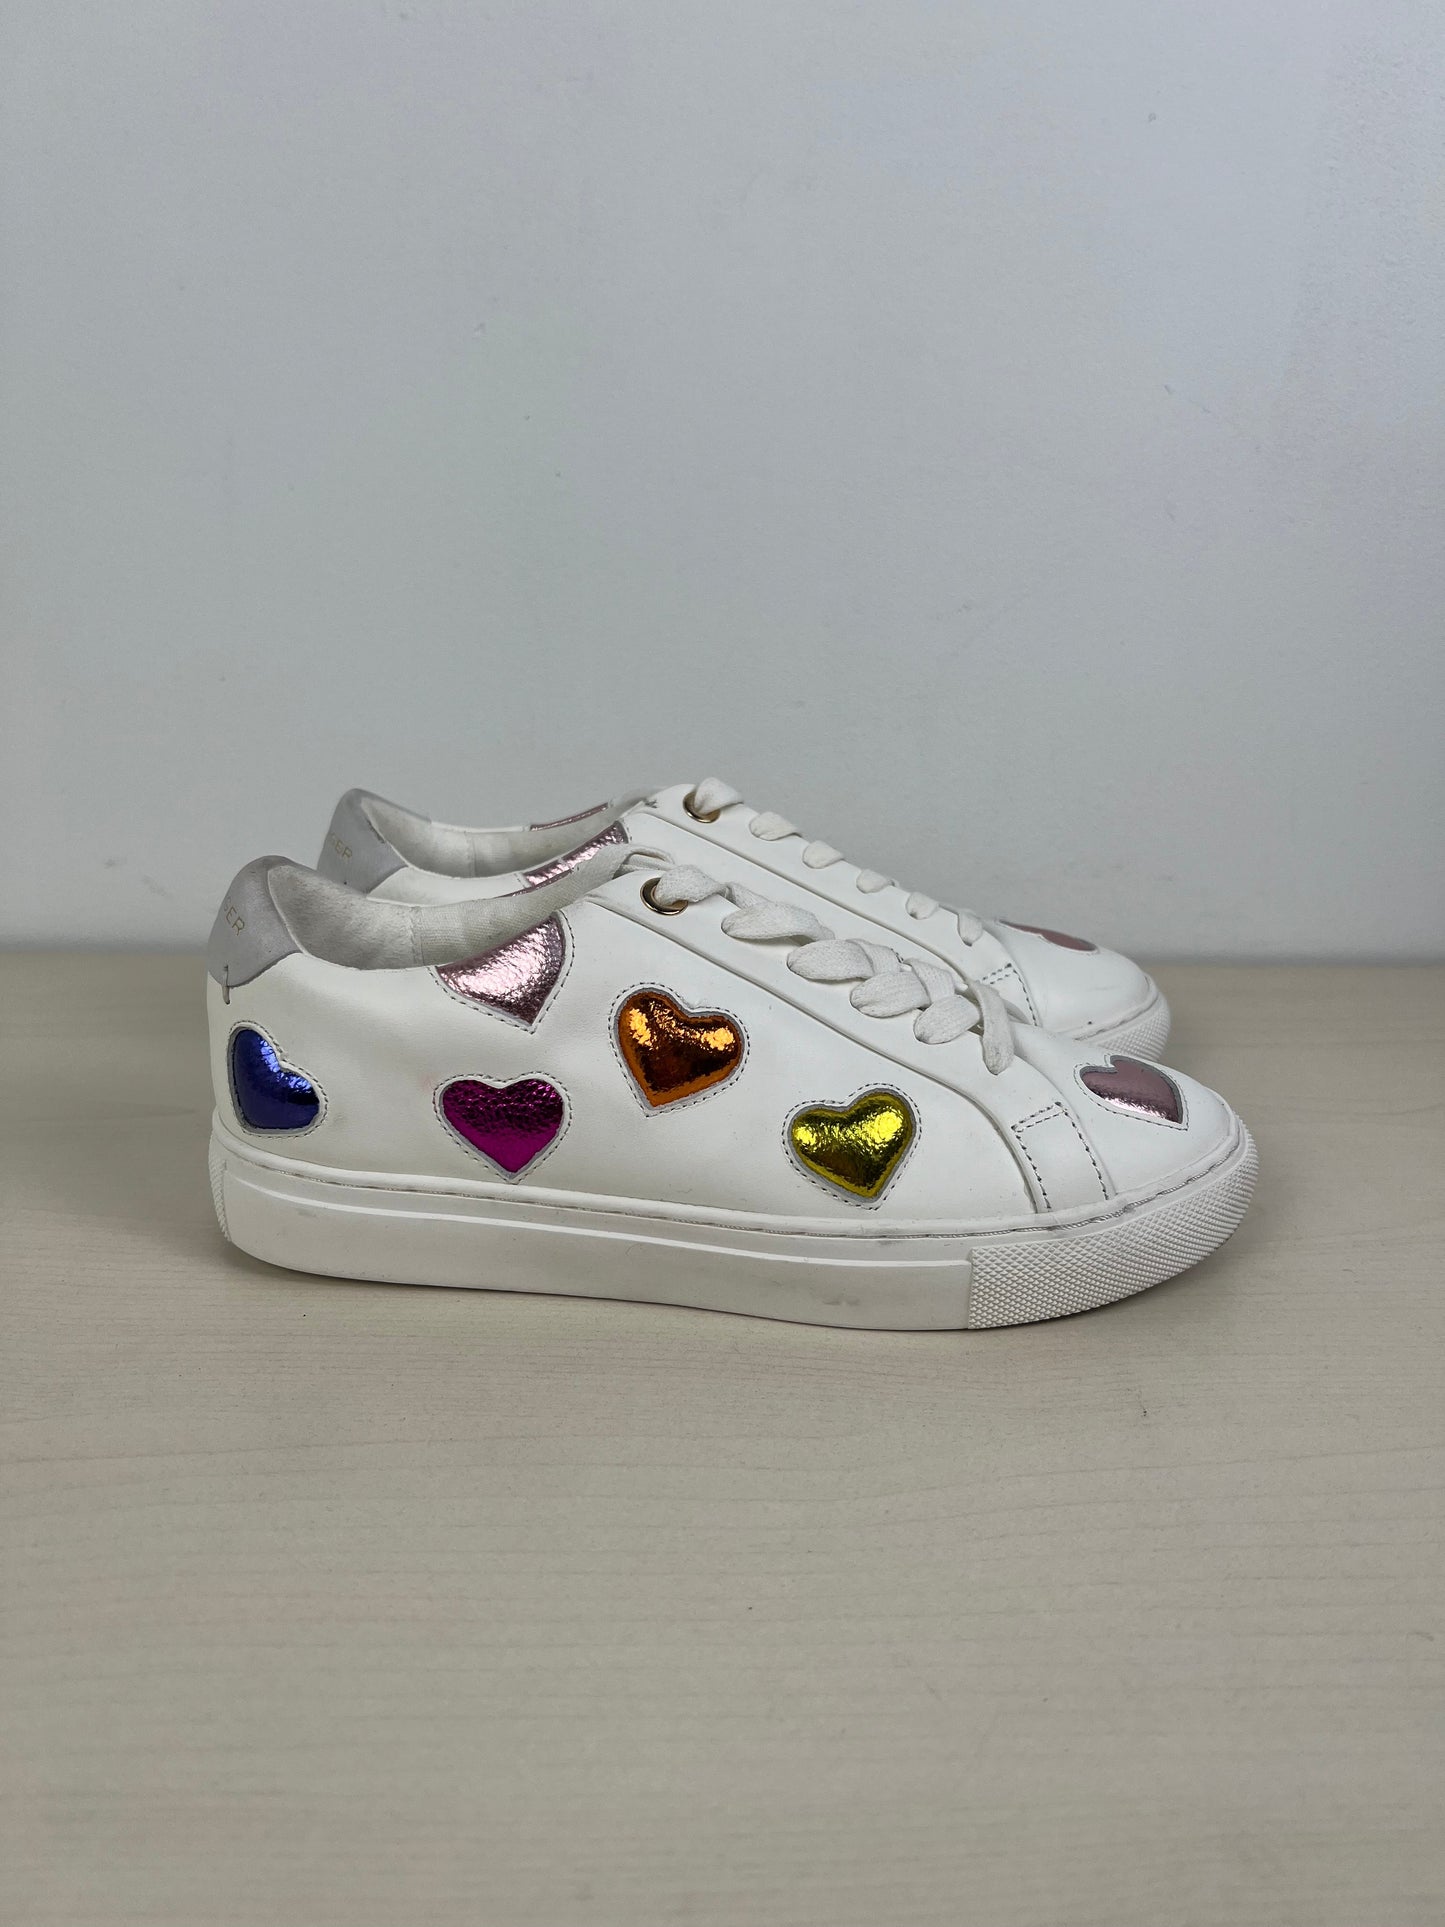 White Shoes Sneakers Kurt Geiger, Size 7